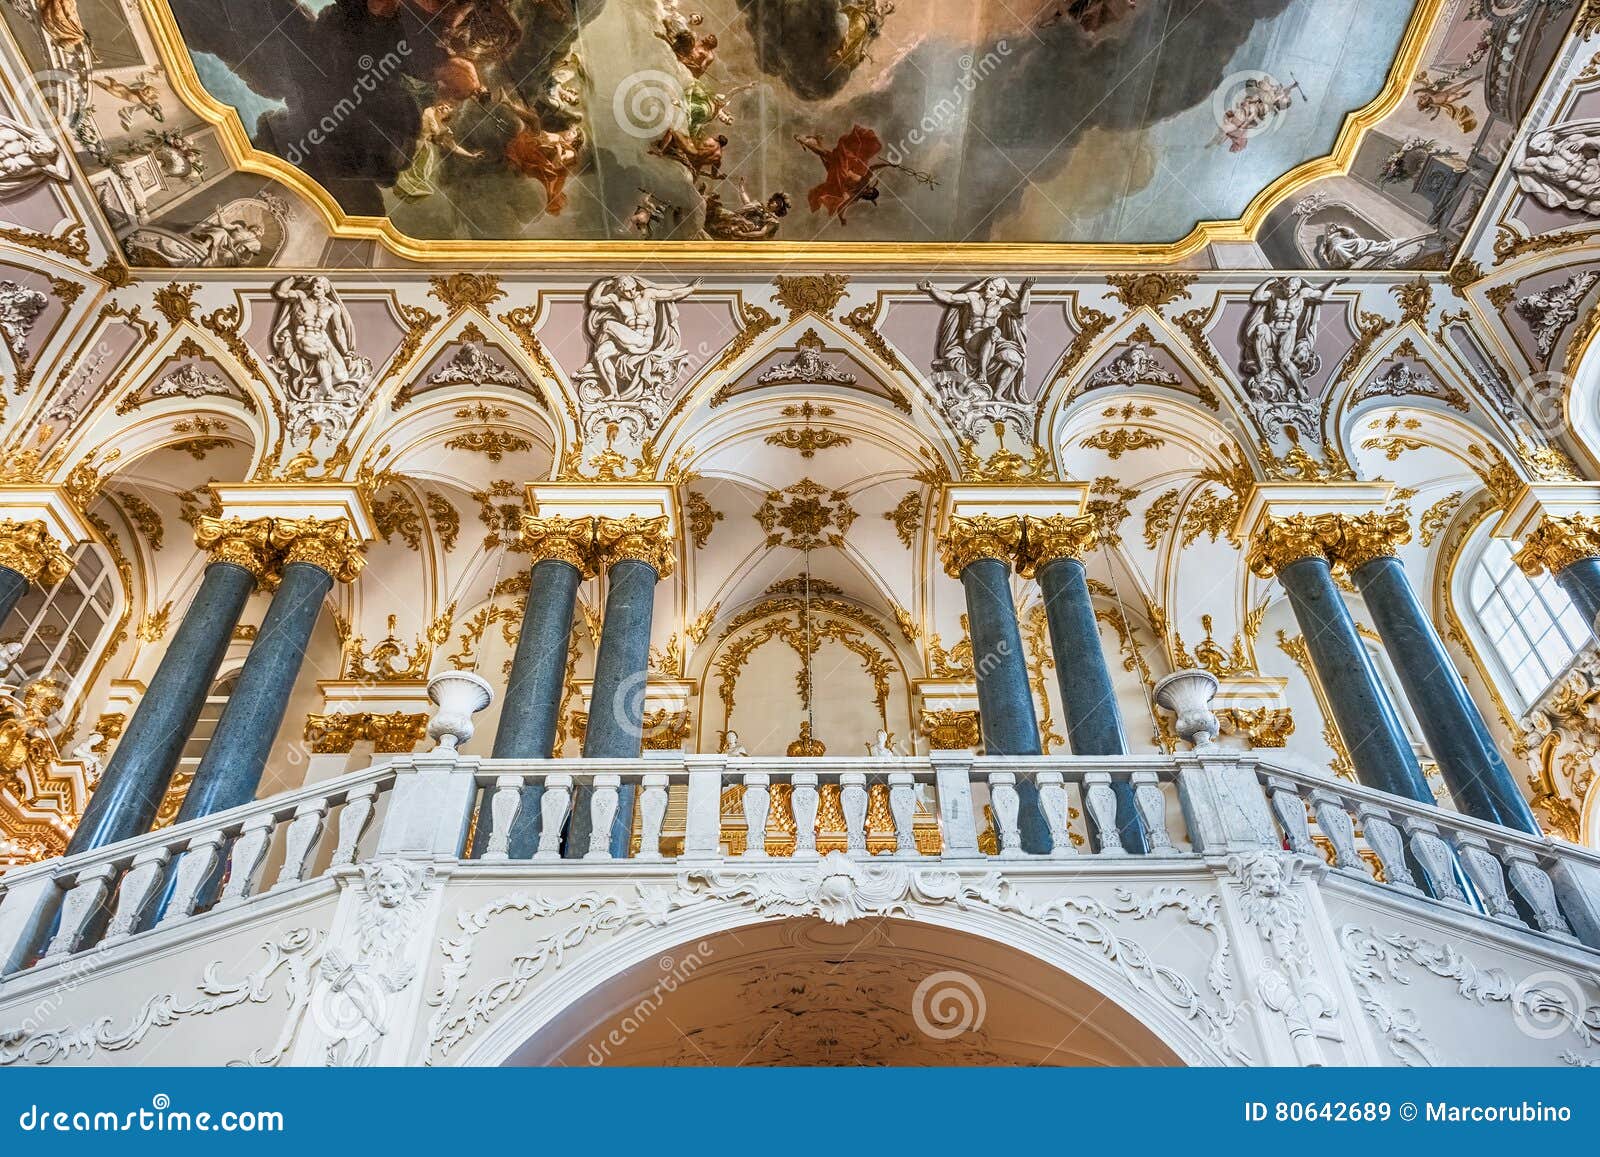 Jordan Staircase of the Winter Palace, Hermitage Museum, St. Pet Editorial Stock Image - Image of ceiling, 80642689